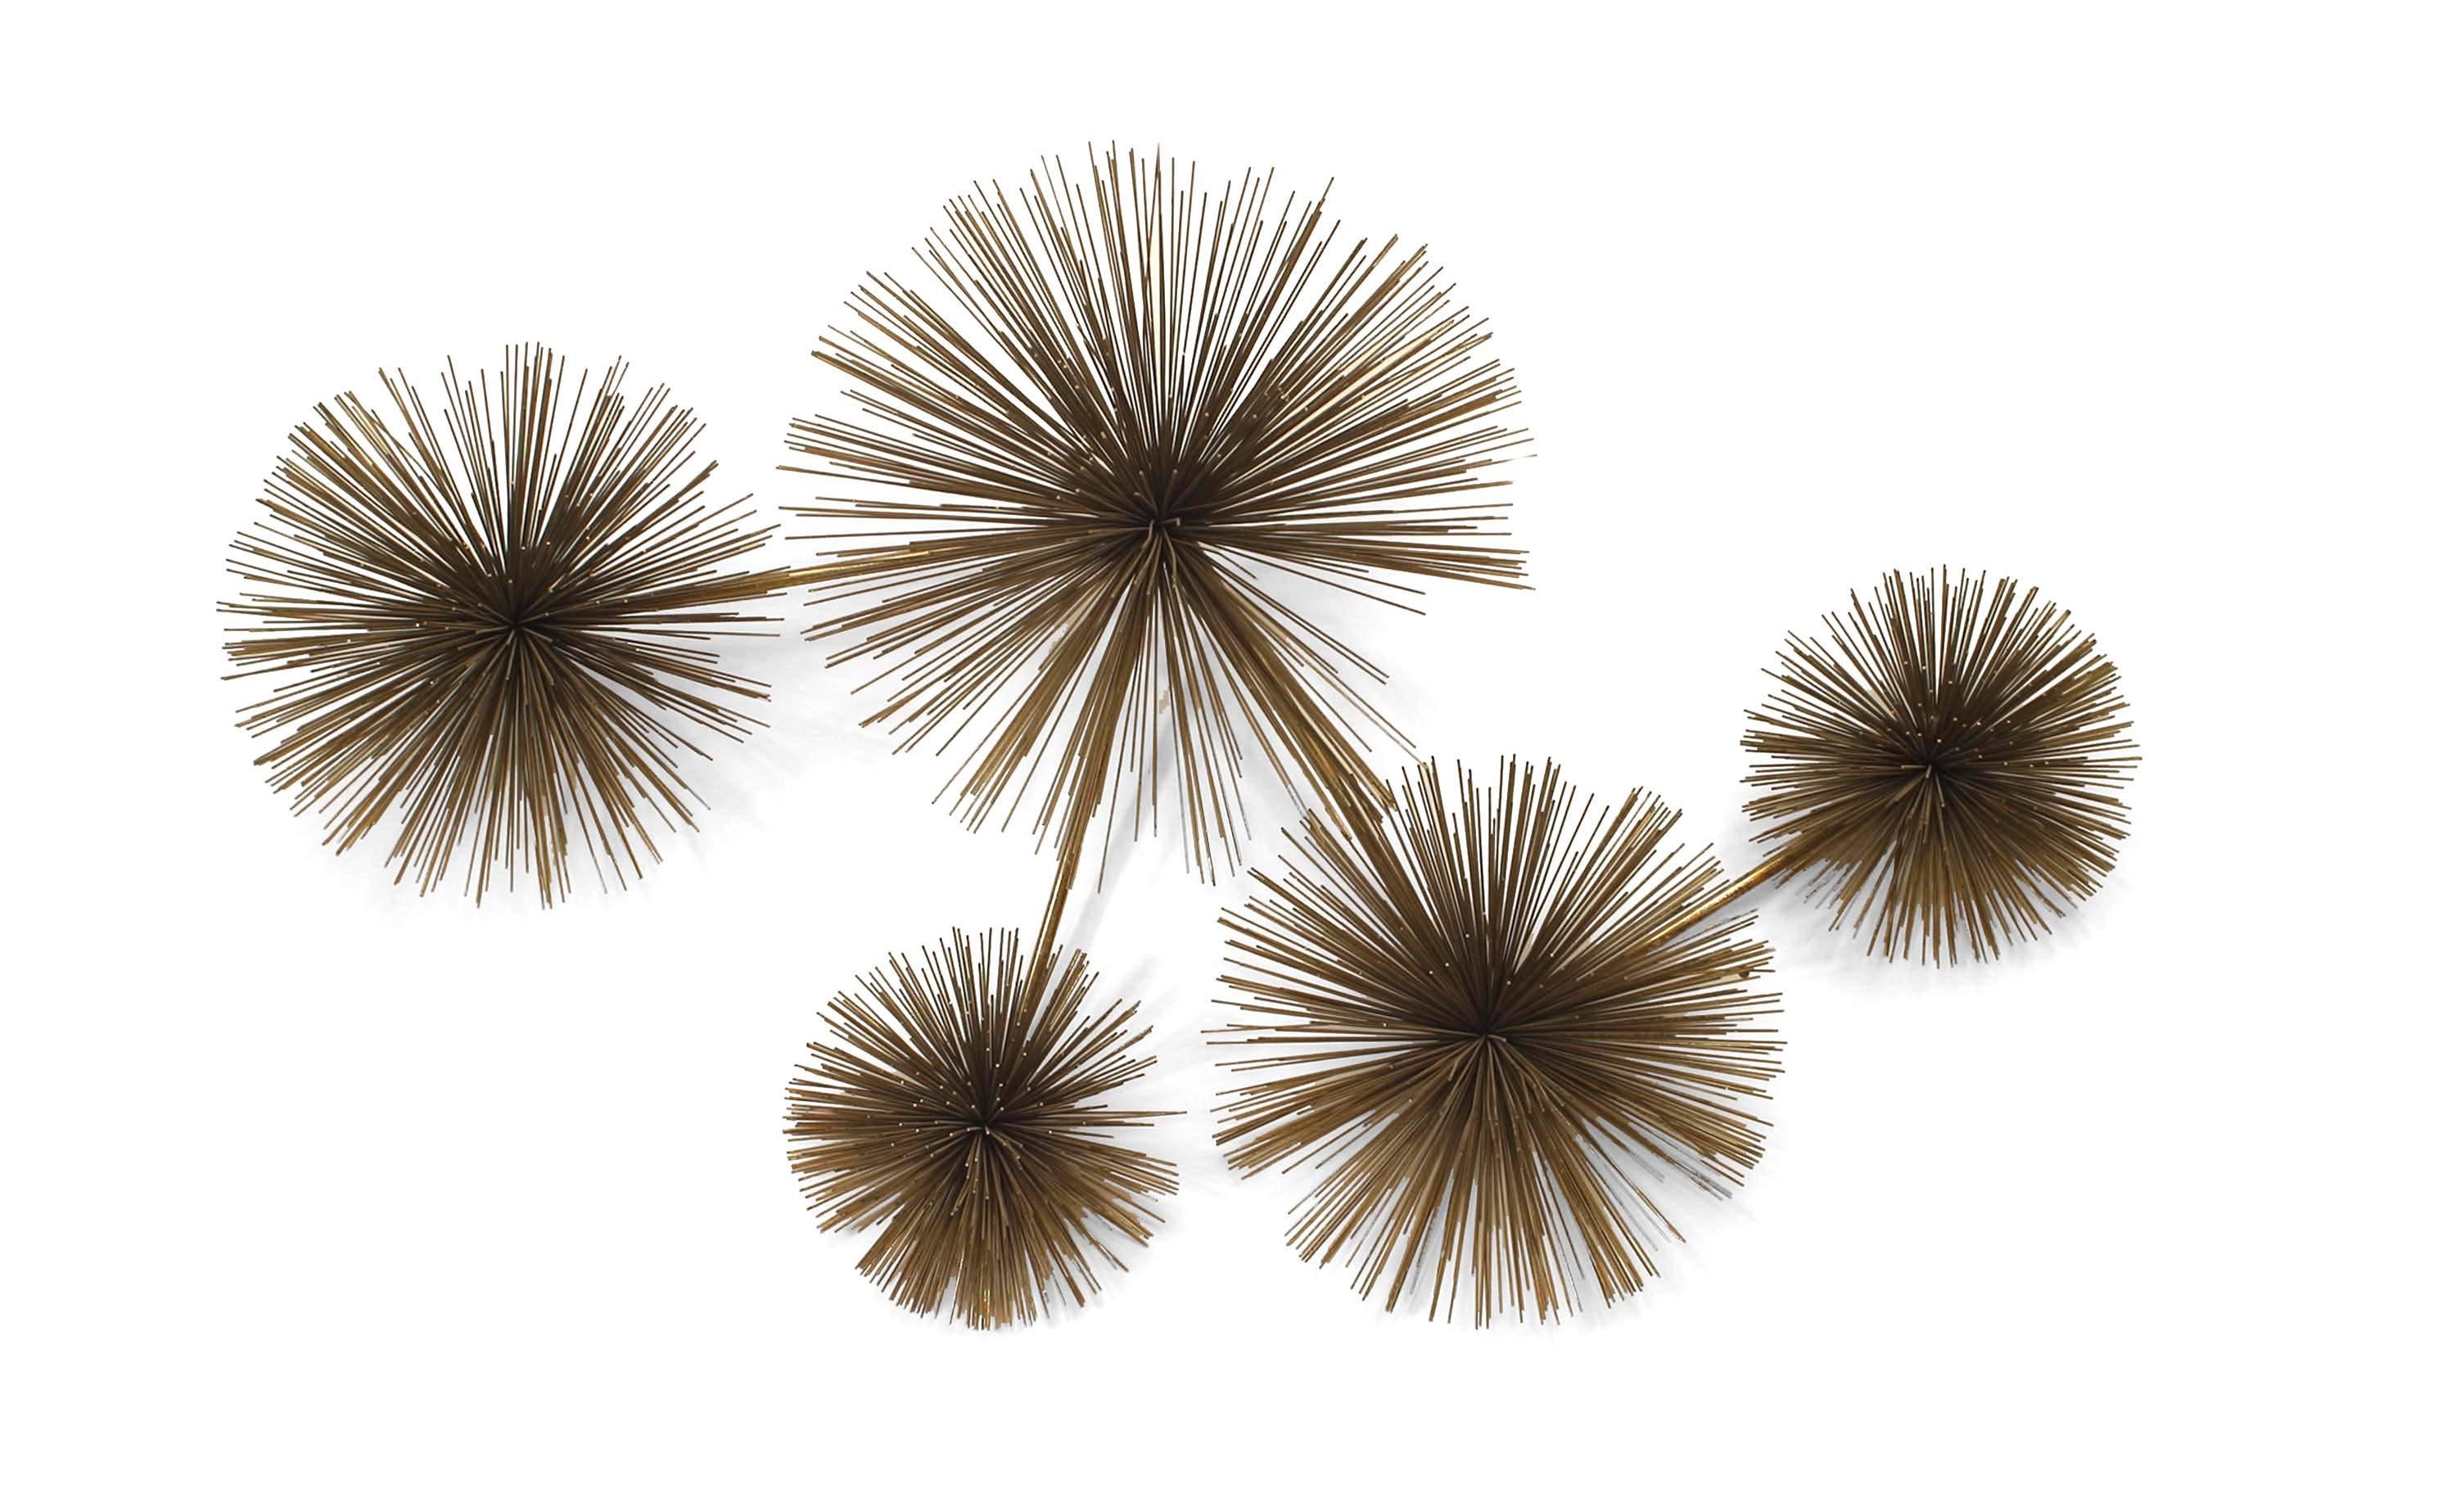 Signed and dated by Curtis Jere (the compound nom de plume of American artists Curtis Freiler and Jerry Fels), this mid-century wall sculpture features an arrangement of five differently sized balls of radiating patinated wire united by a zigzagging